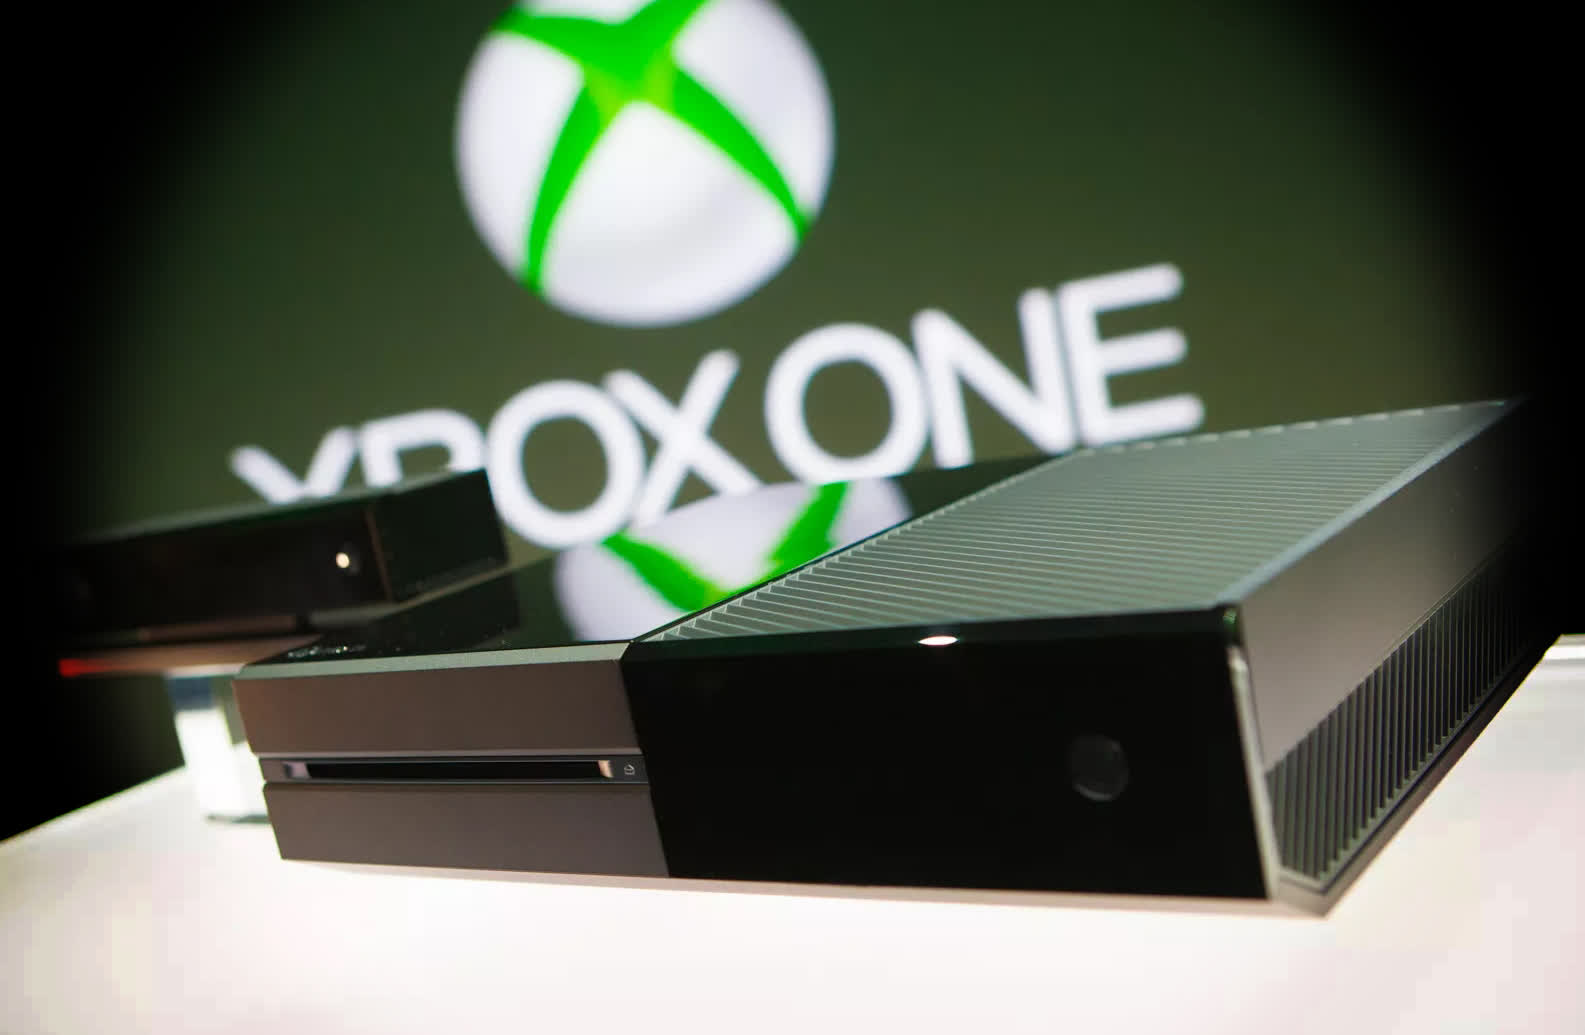 Microsoft is no longer making games for Xbox One